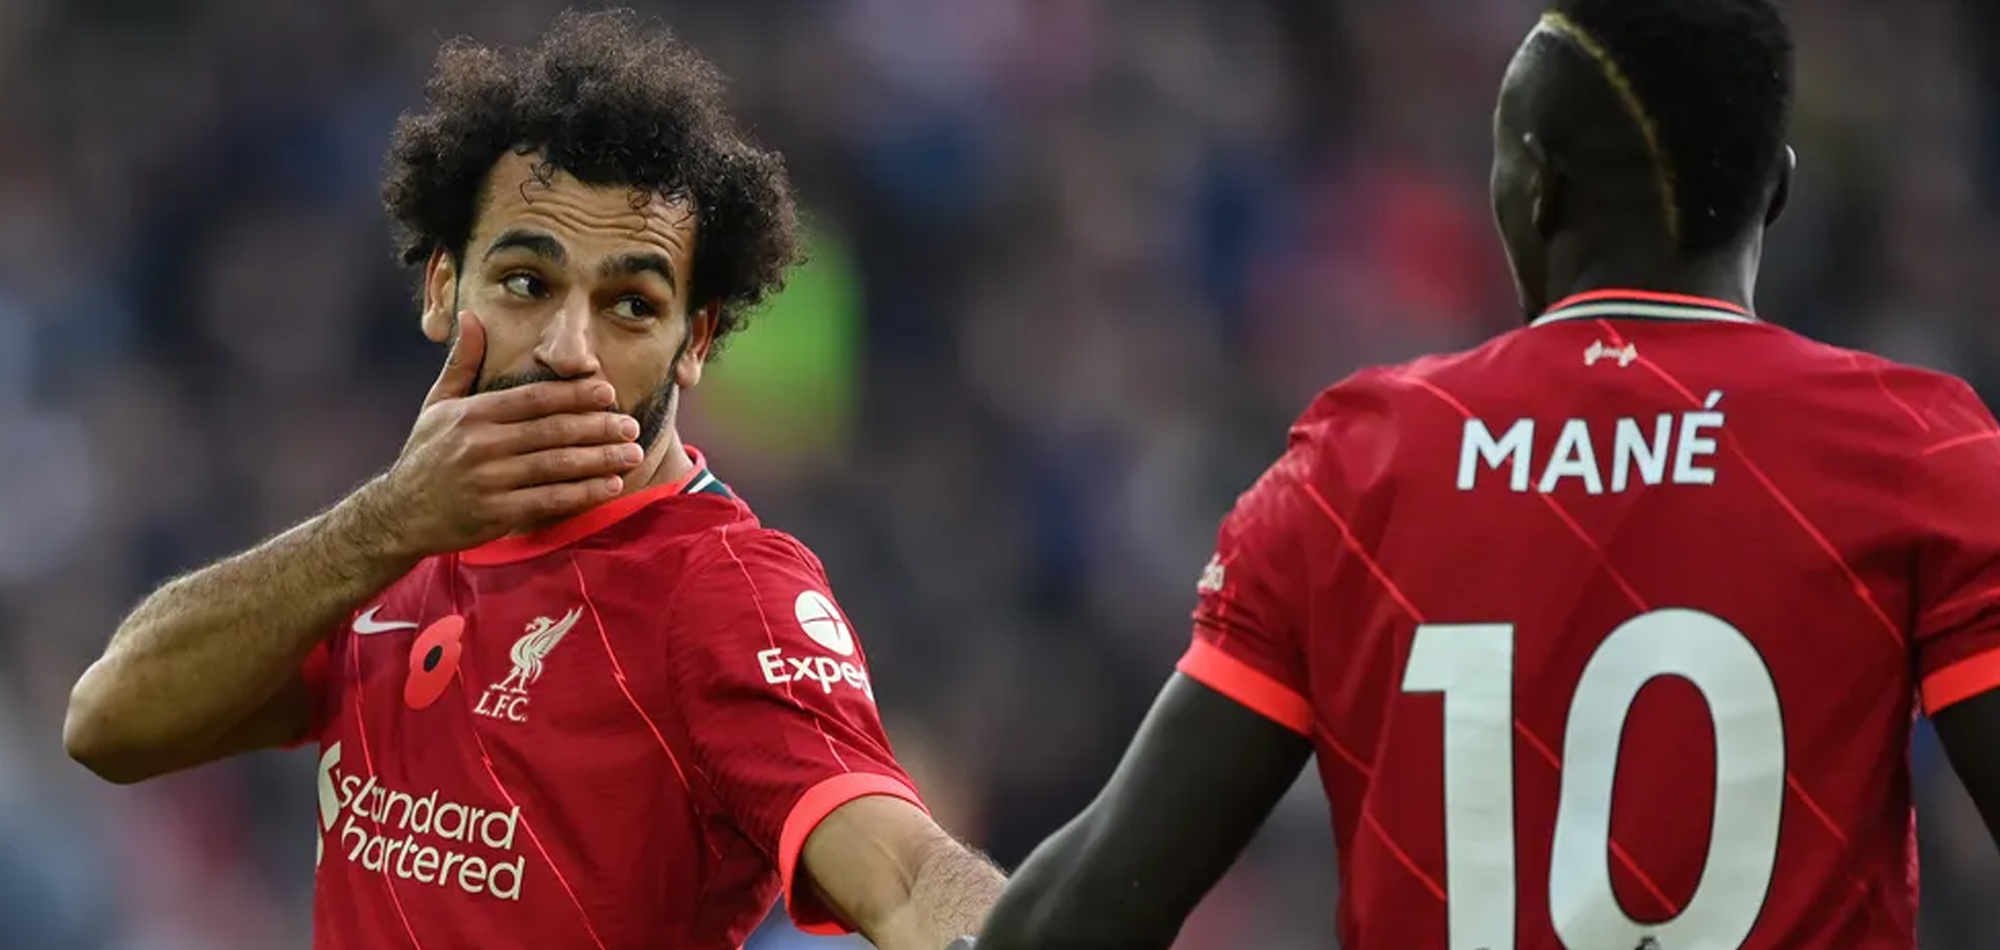 Liverpool duo Salah and Mane go head-to-head for place at 2022 World Cup as Egypt drawn against Senegal